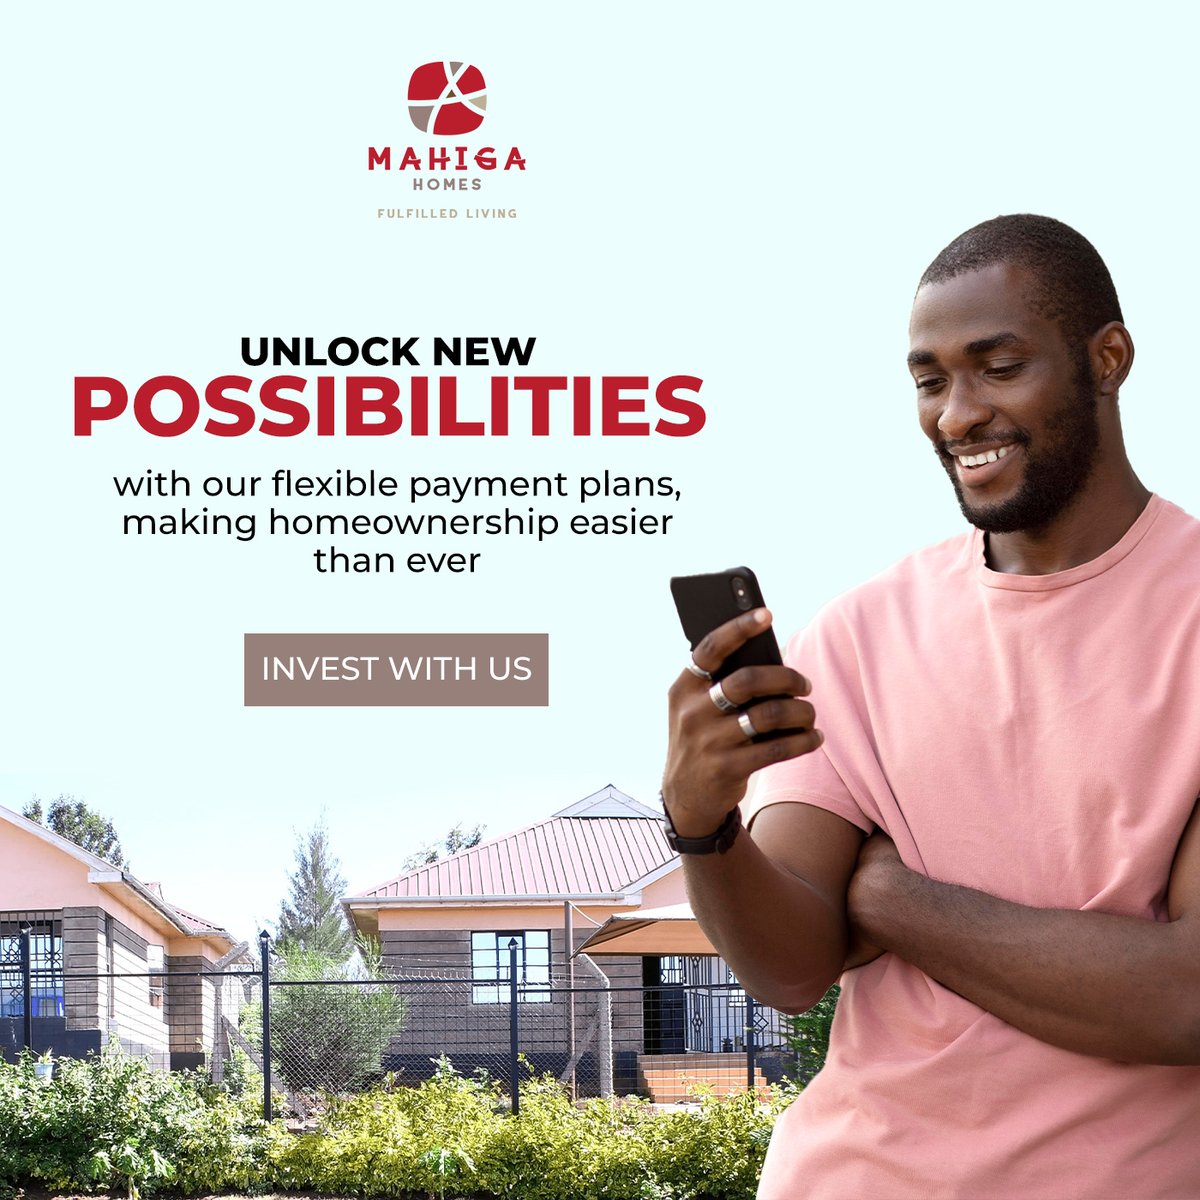 Unlock new possibilities with our flexible payment plans, making home ownership easier than ever before! 

Visit our website on mahigahomes.co.ke
#wedeliver #creatingsmiles #mahigahomes #AffordableHomes #homes #ownahome #homeowners